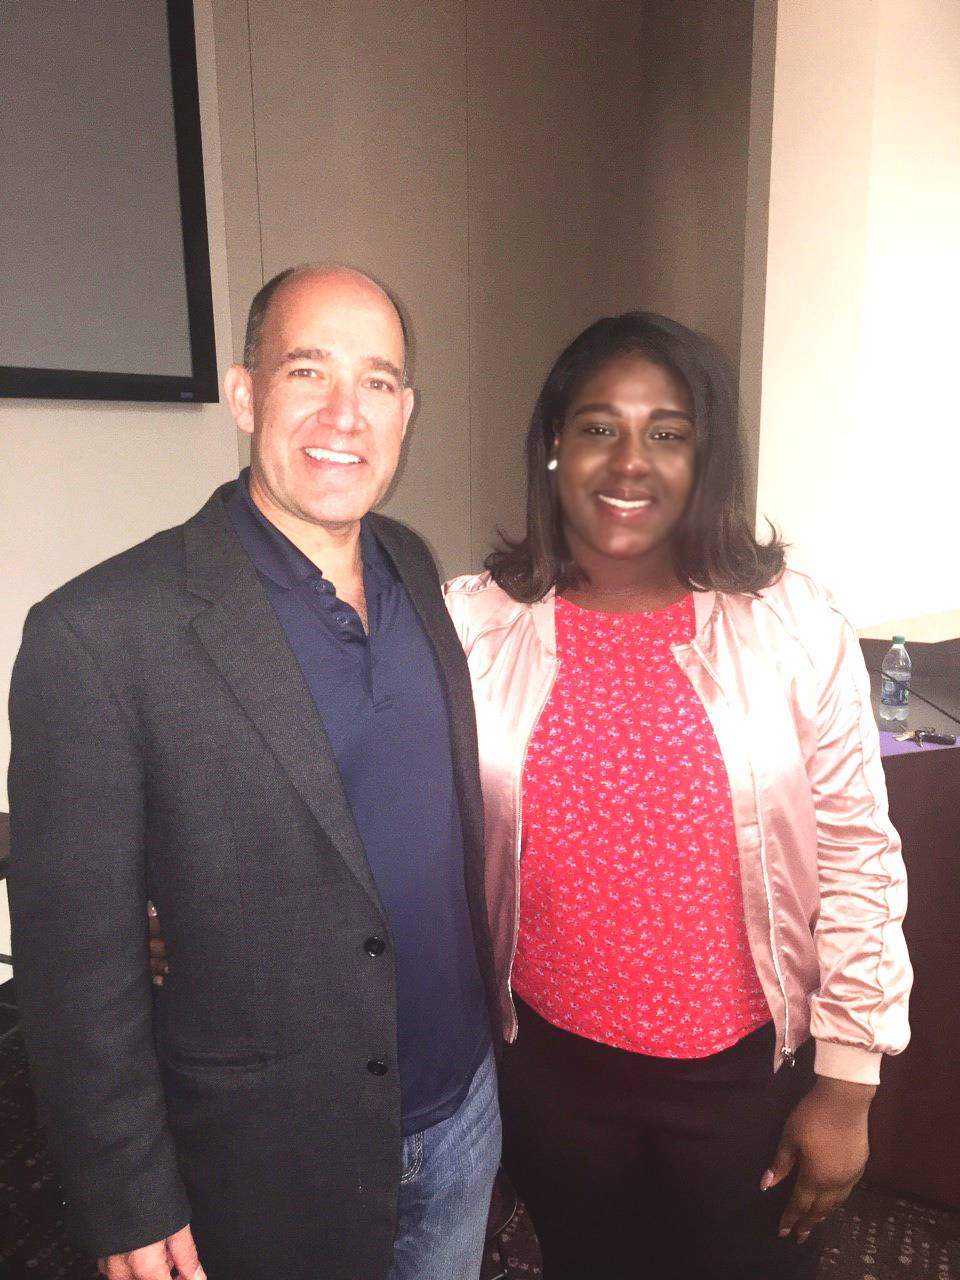 Matthew Dowd with Student